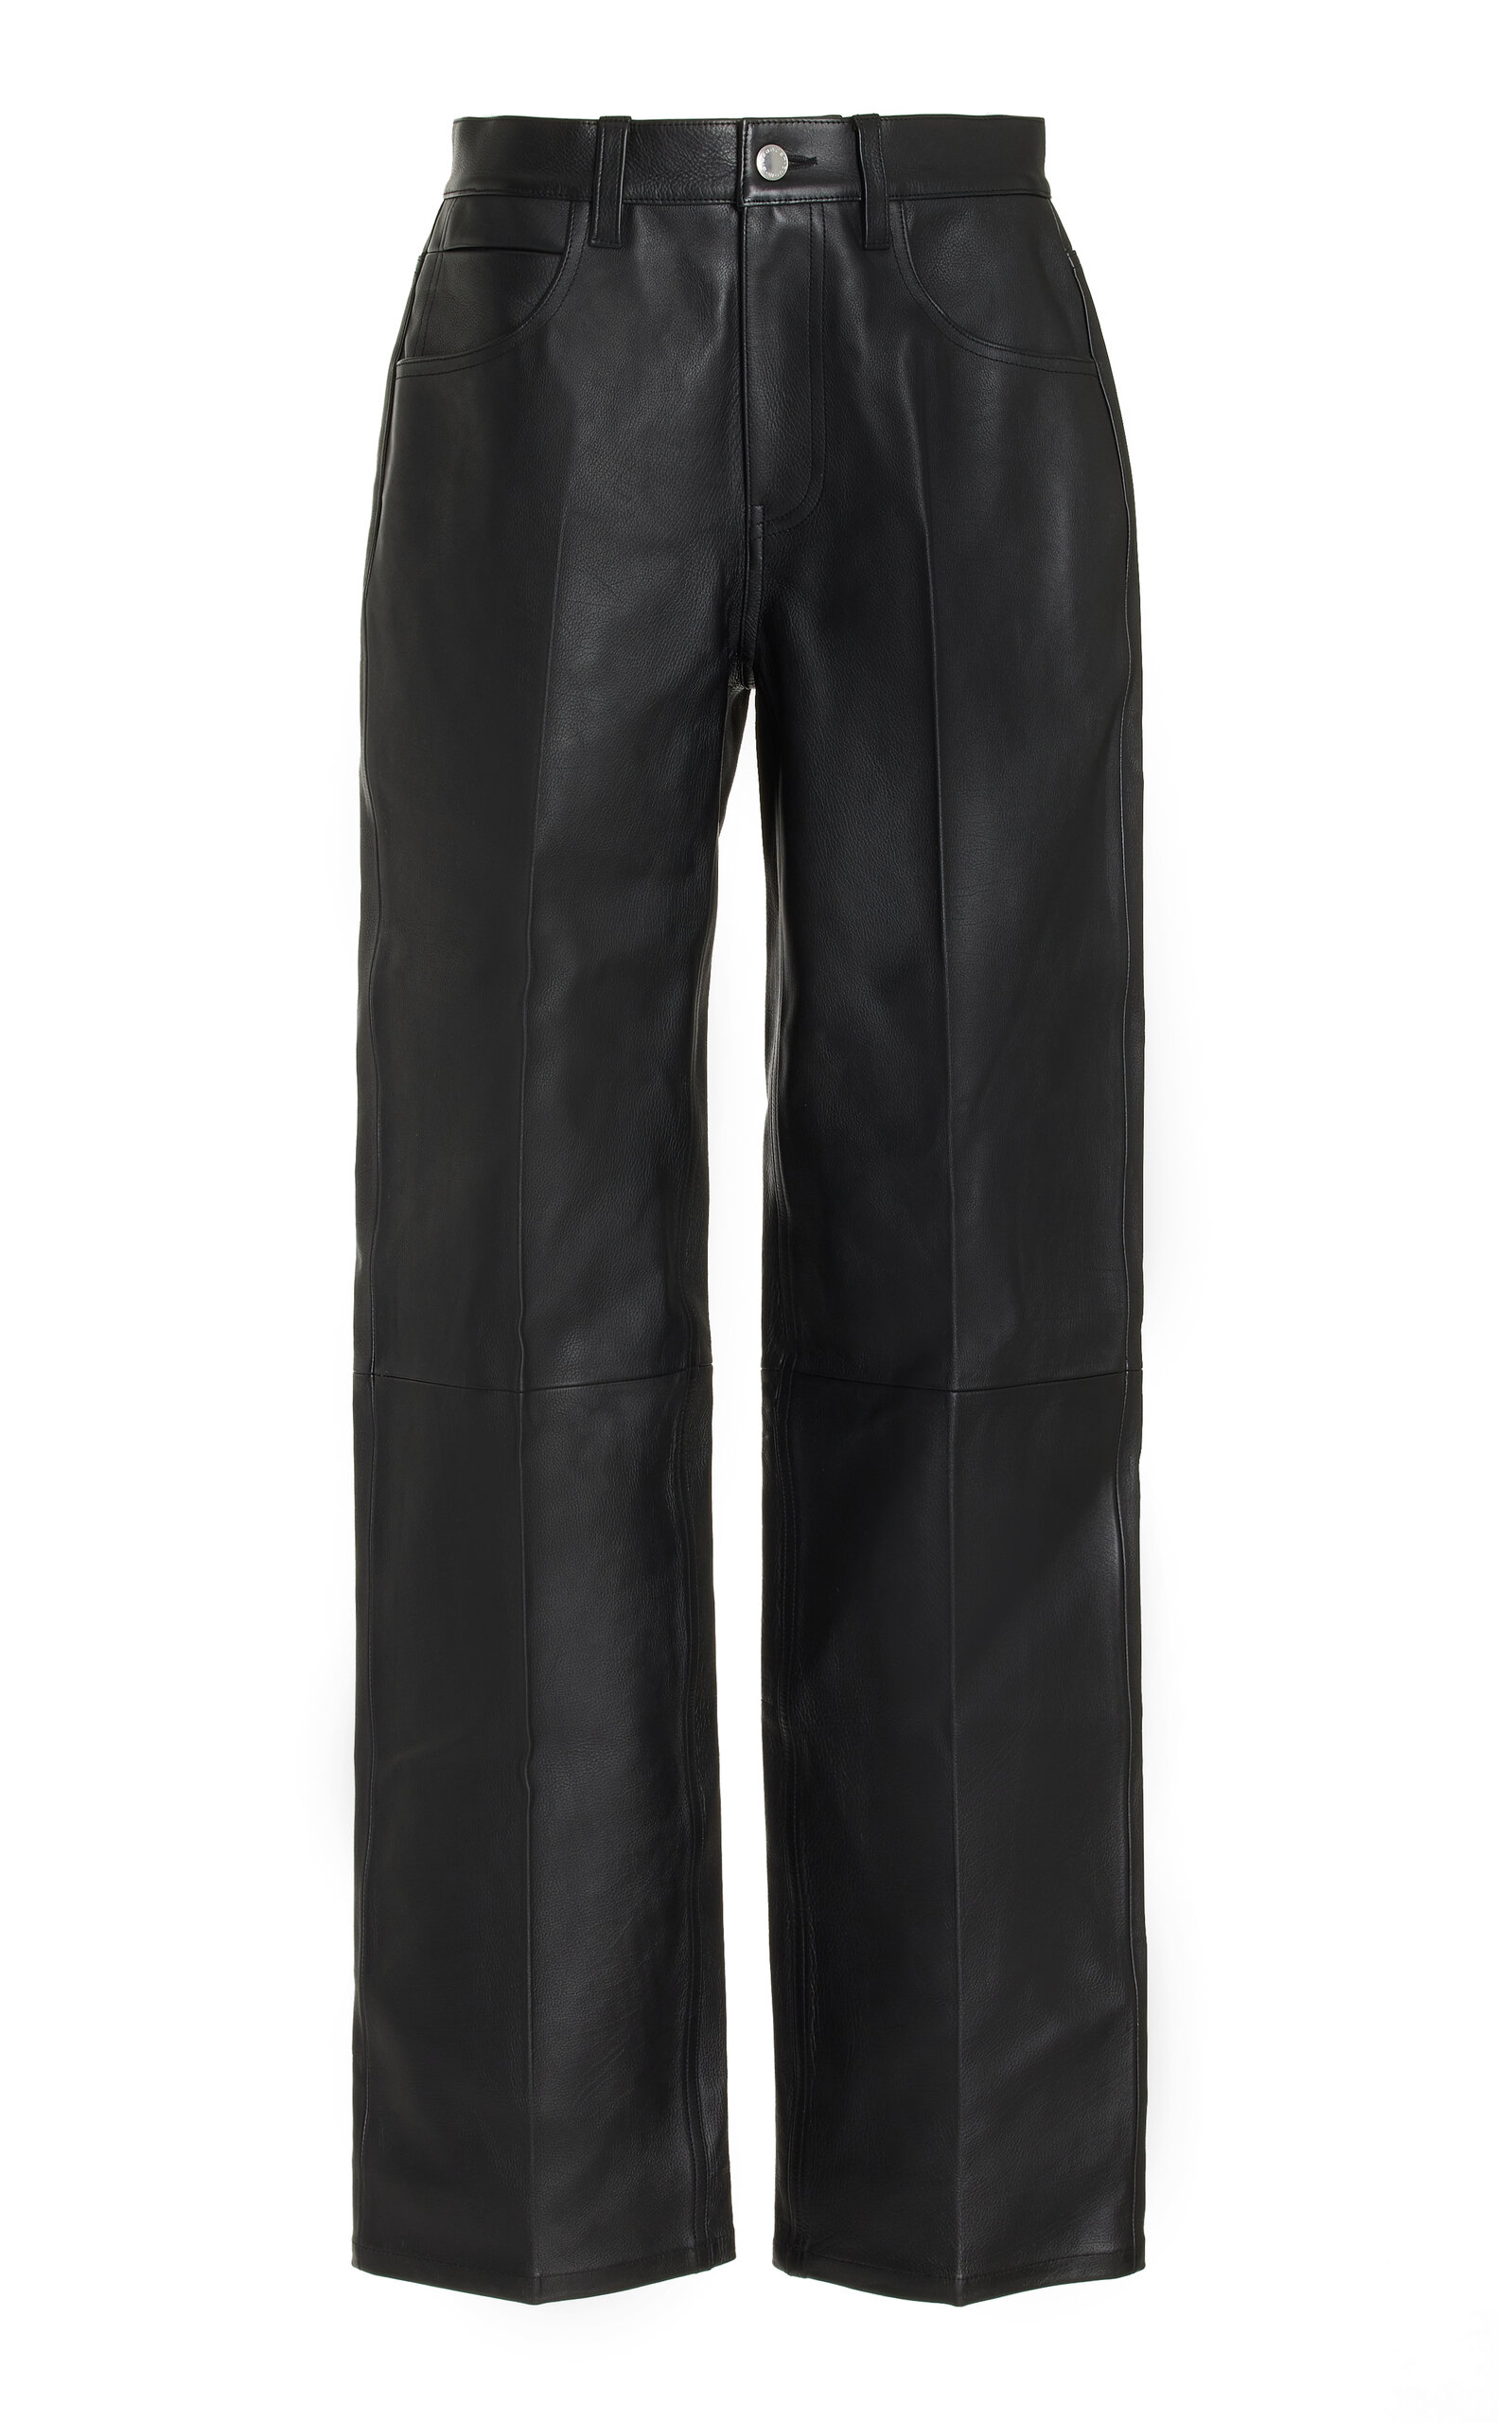 Alexander Wang Women's Mid-Rise Leather Relaxed Straight-Leg Pants